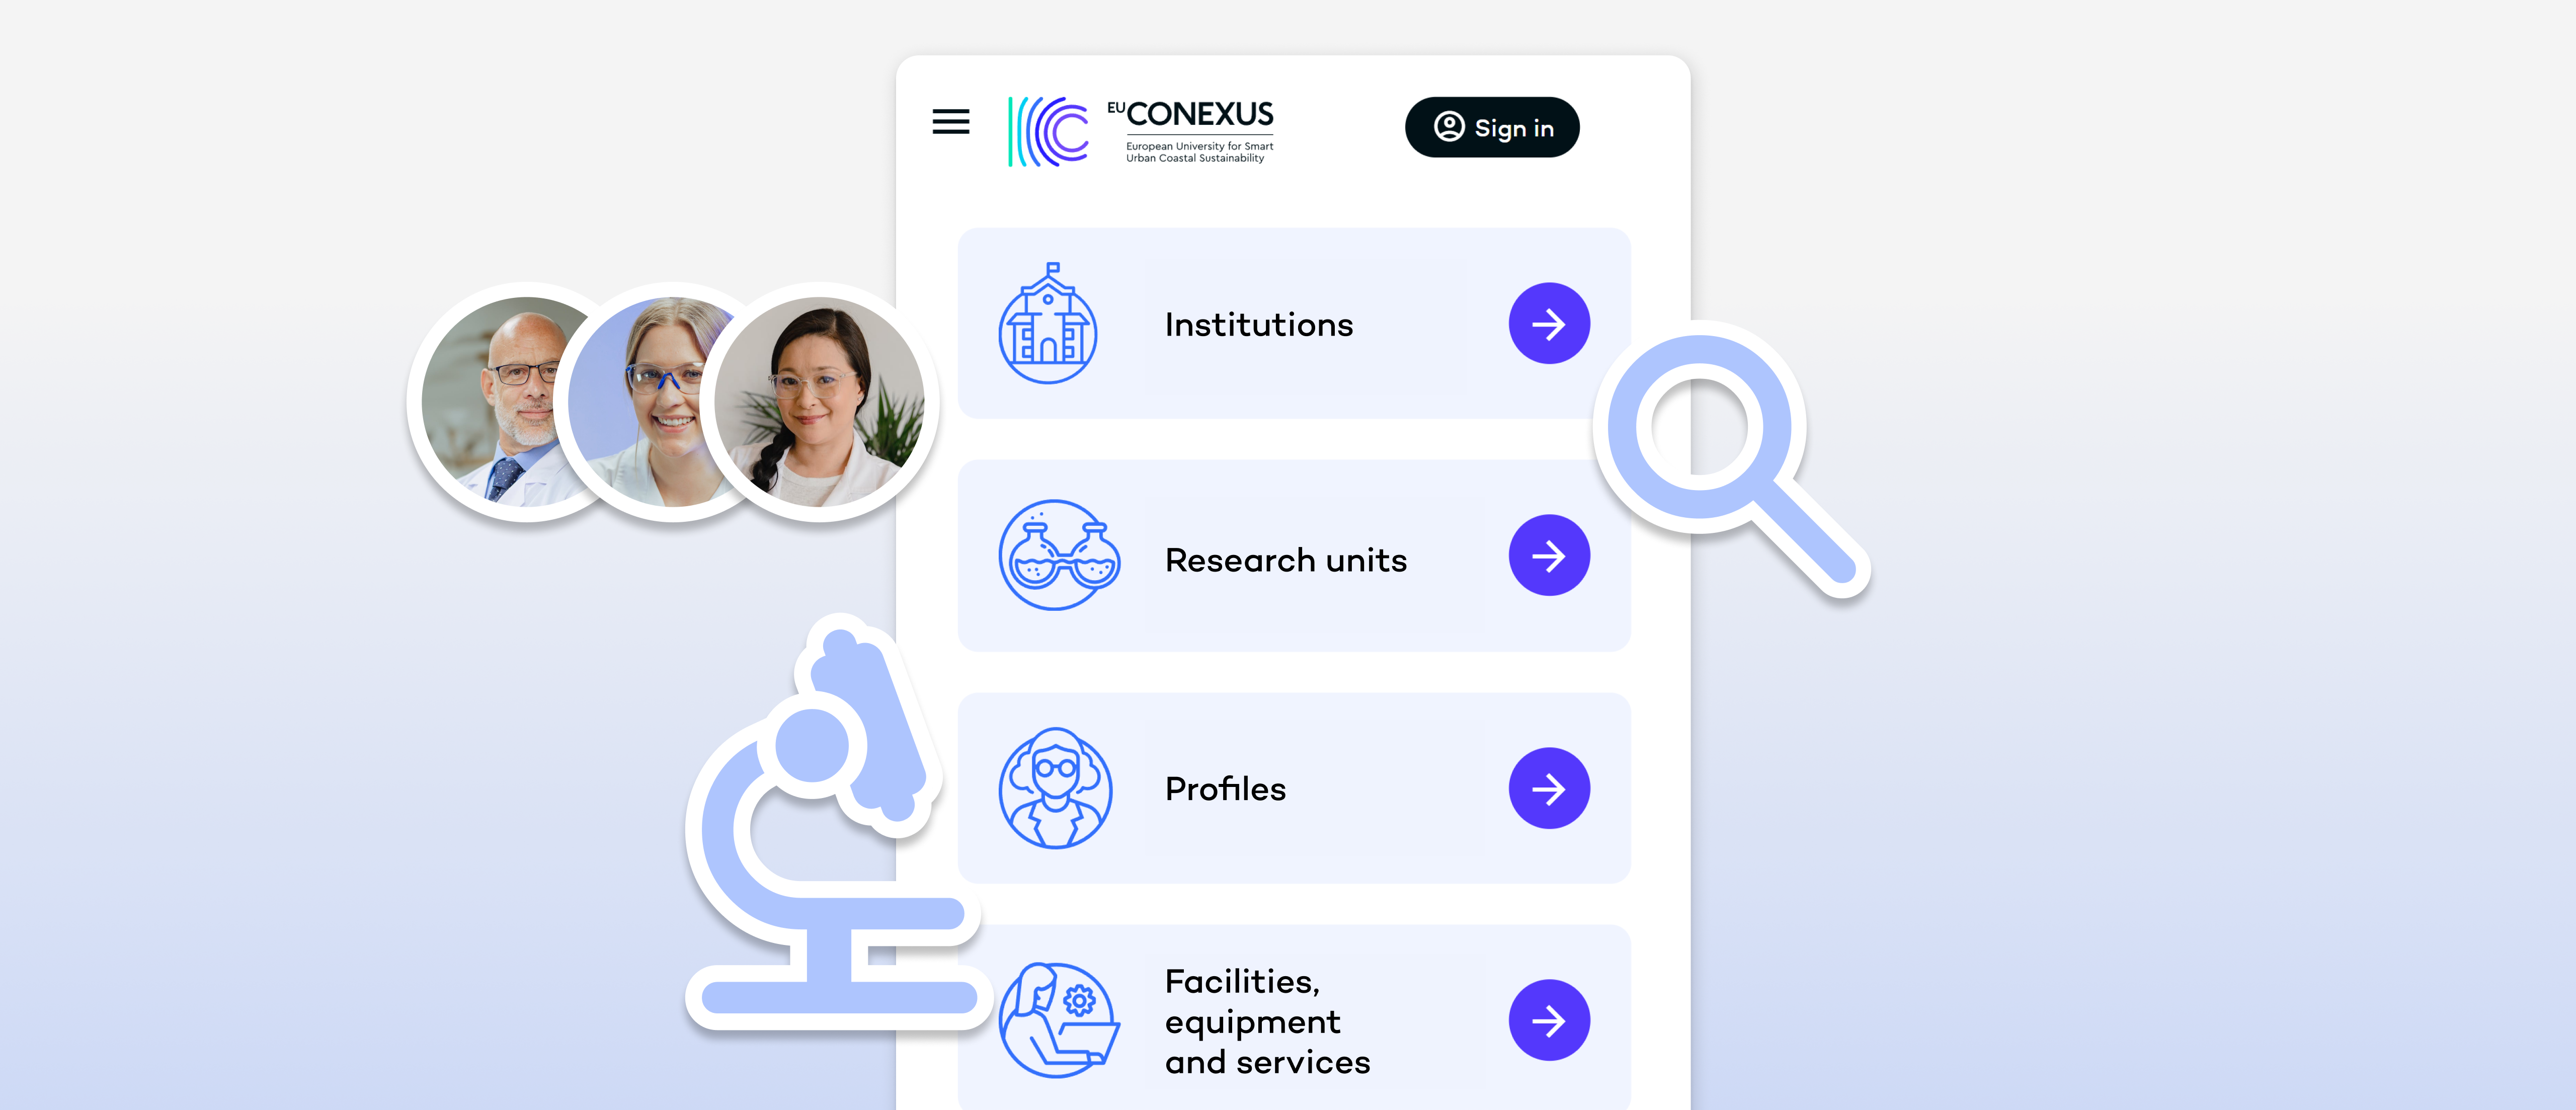 EU-CONEXUS launches its Research & Innovation Information System